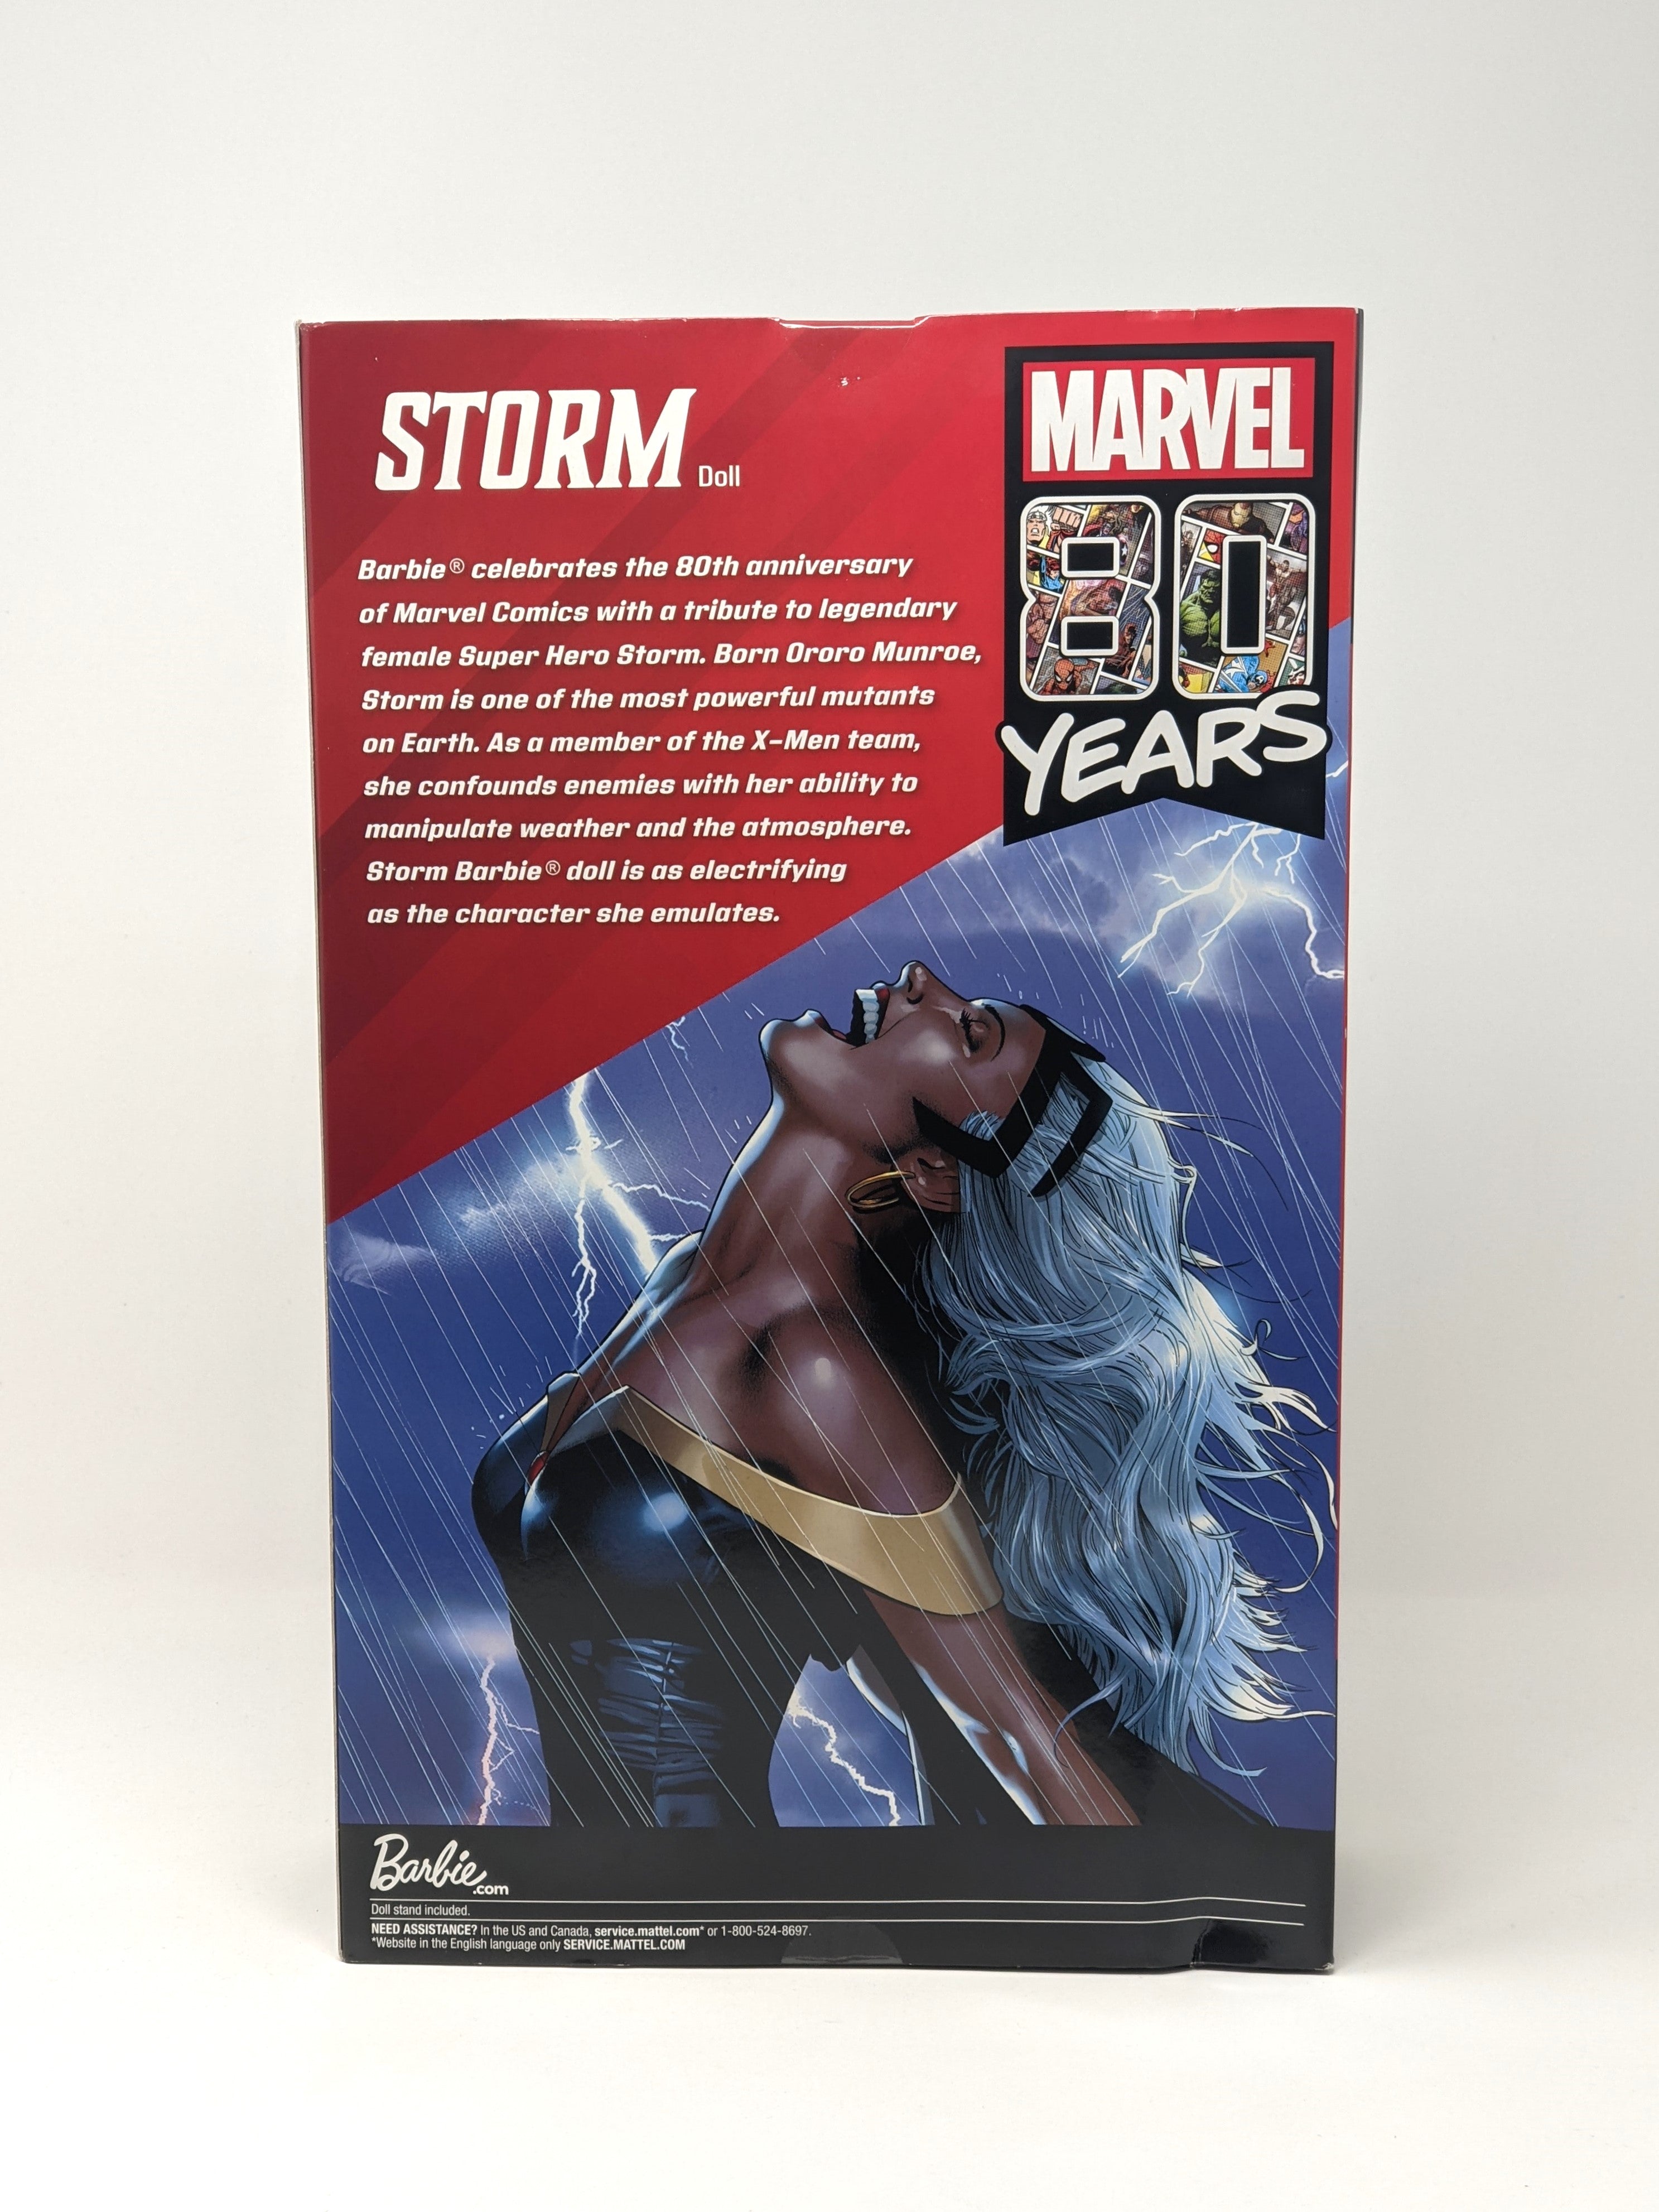 Alison Sealy-Smith Marvel Storm Signed Barbie Signature Doll JSA COA Certified Authograph